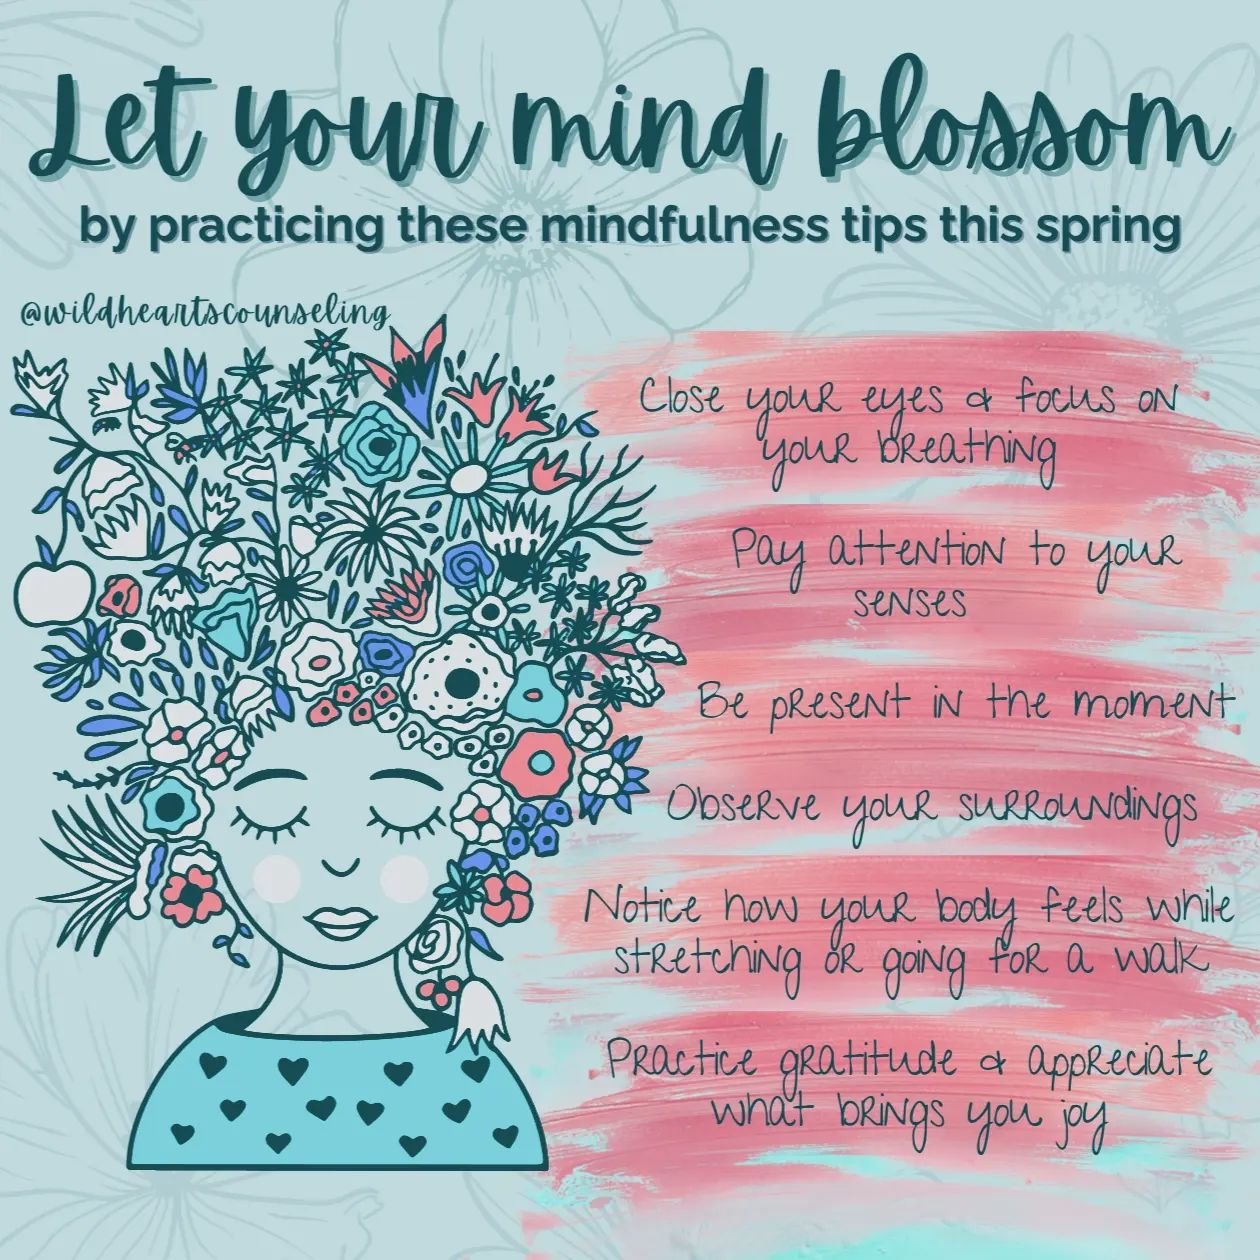 Practicing mindfulness can help us appreciate the beauty of life, focus on the present, and cultivate a sense of calm. 🌸💭
#wildheartscounseling #mindfulness #selfcare #healthymind #healthylife #mentalhealthtips #positivementalhealth #positivelife  